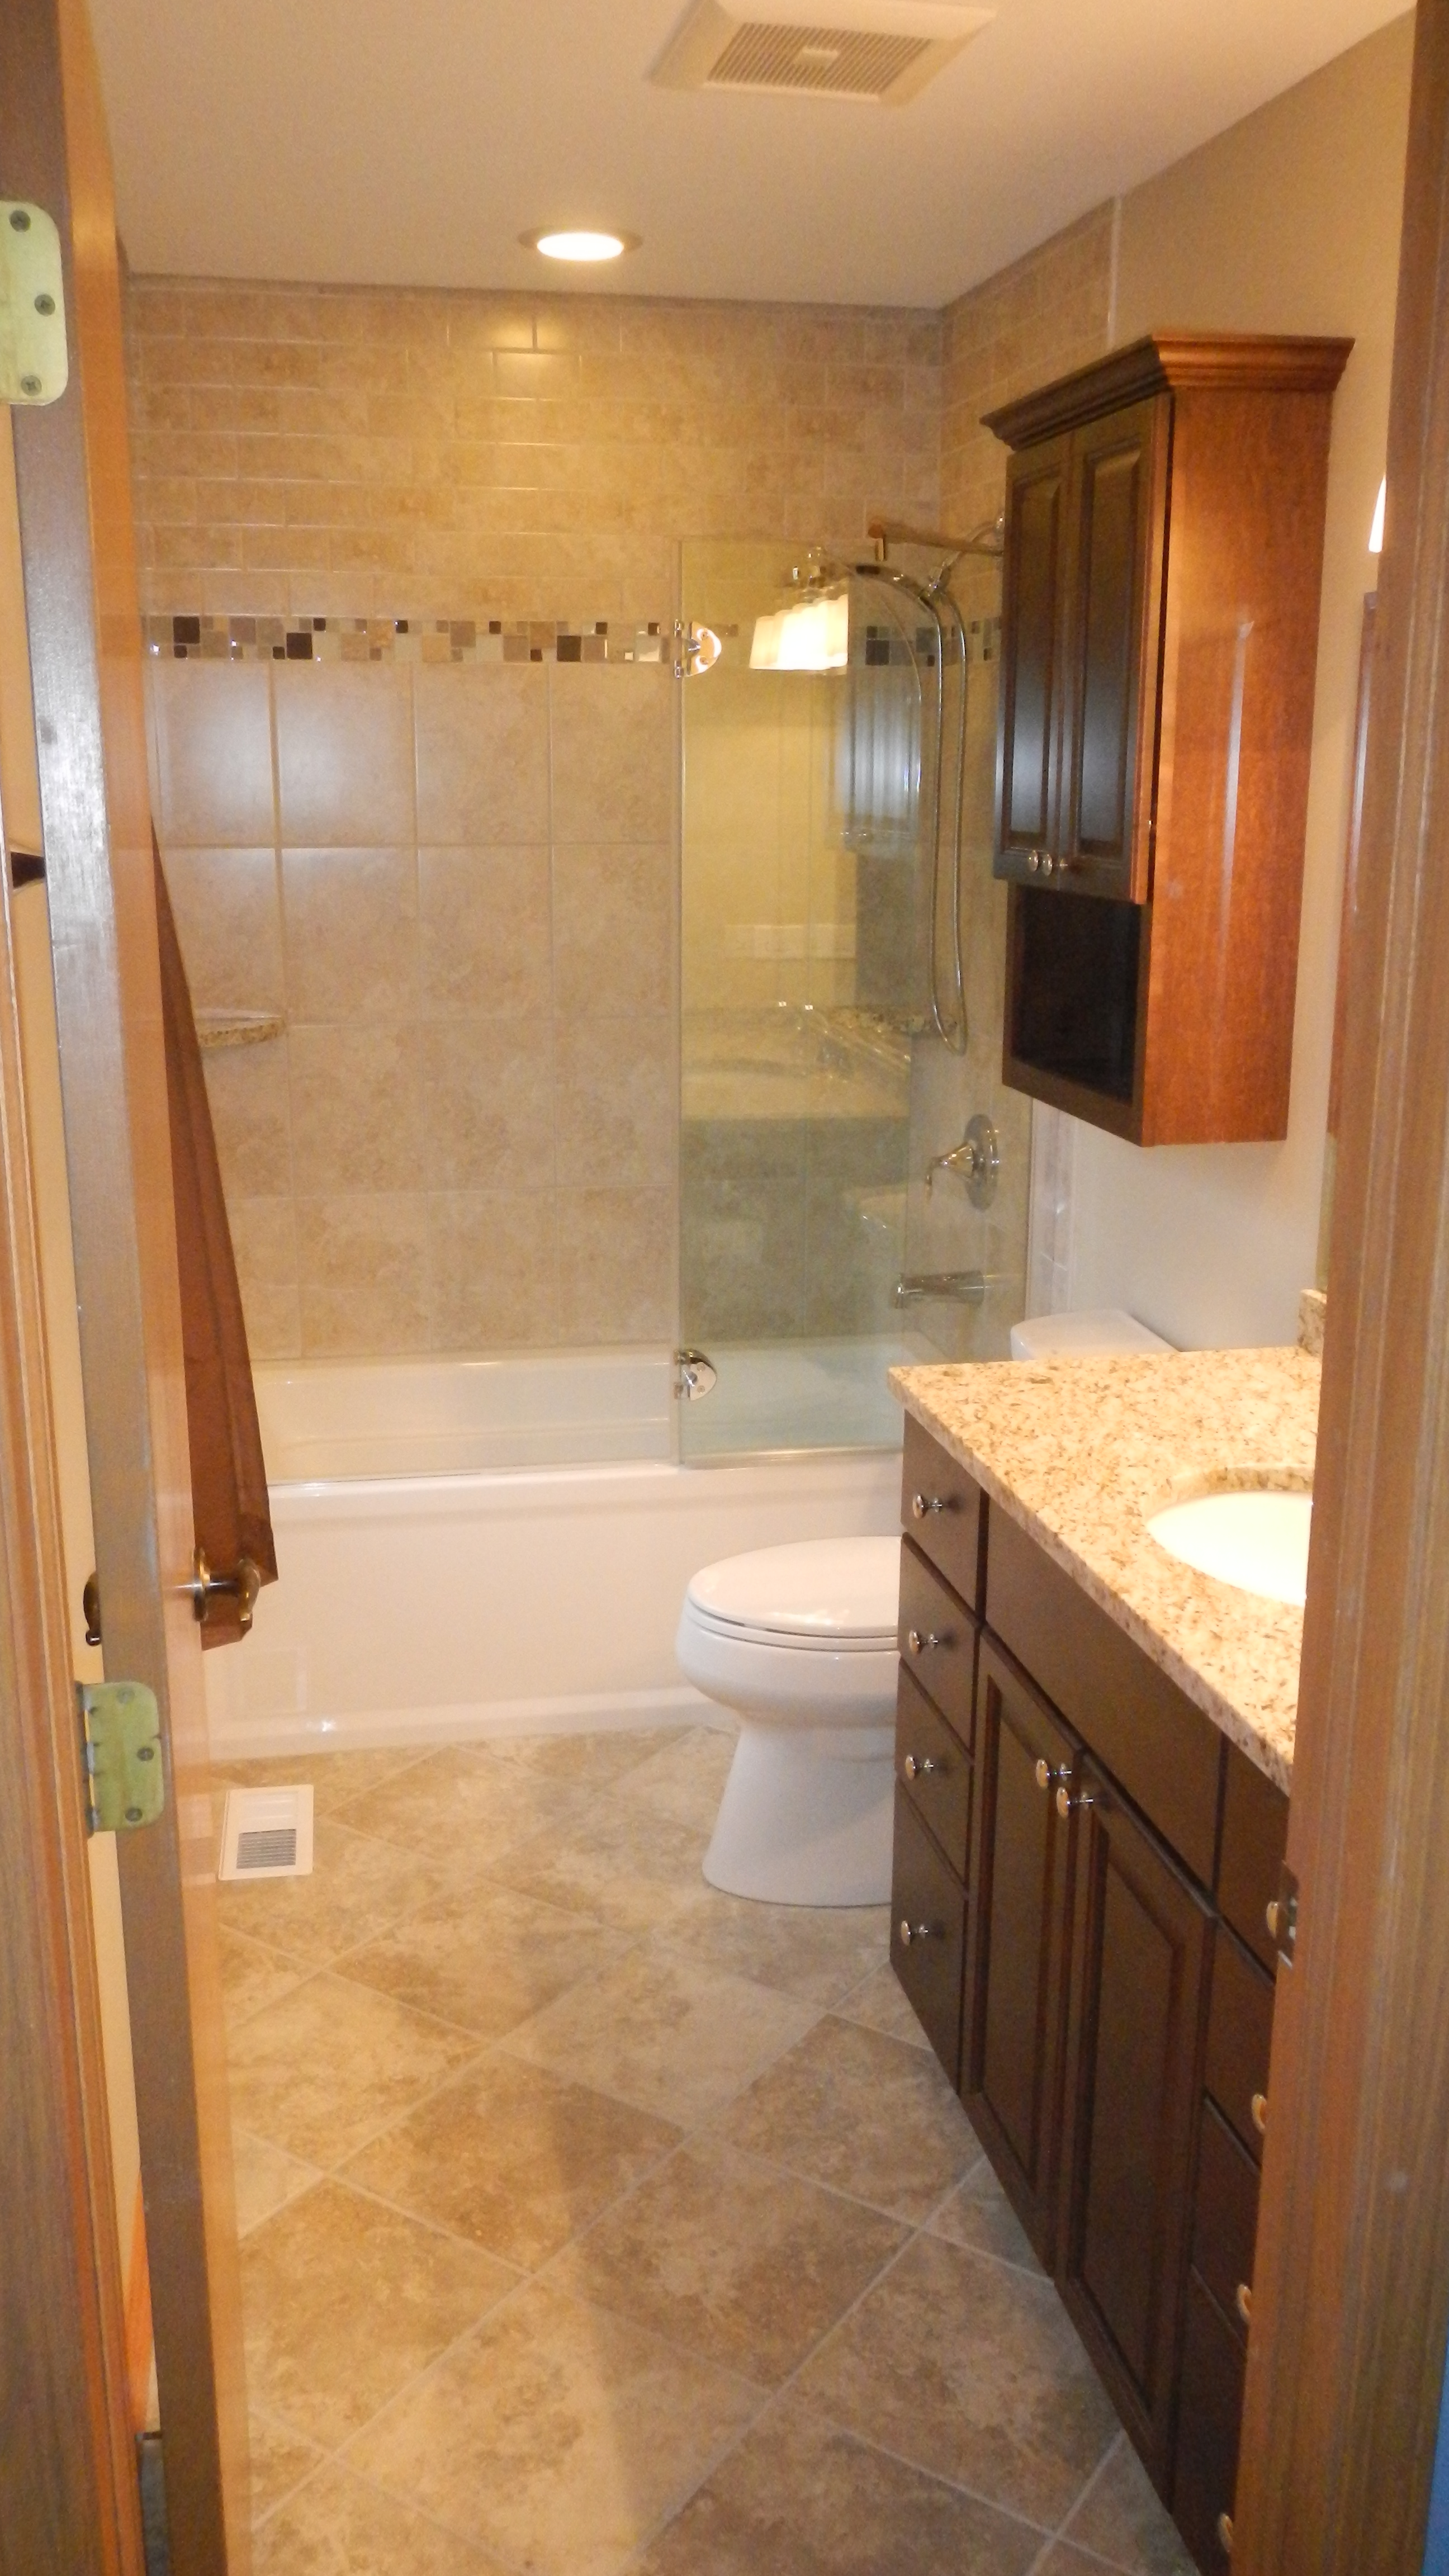 See a complete project video showing the remodeling project from start to finish!